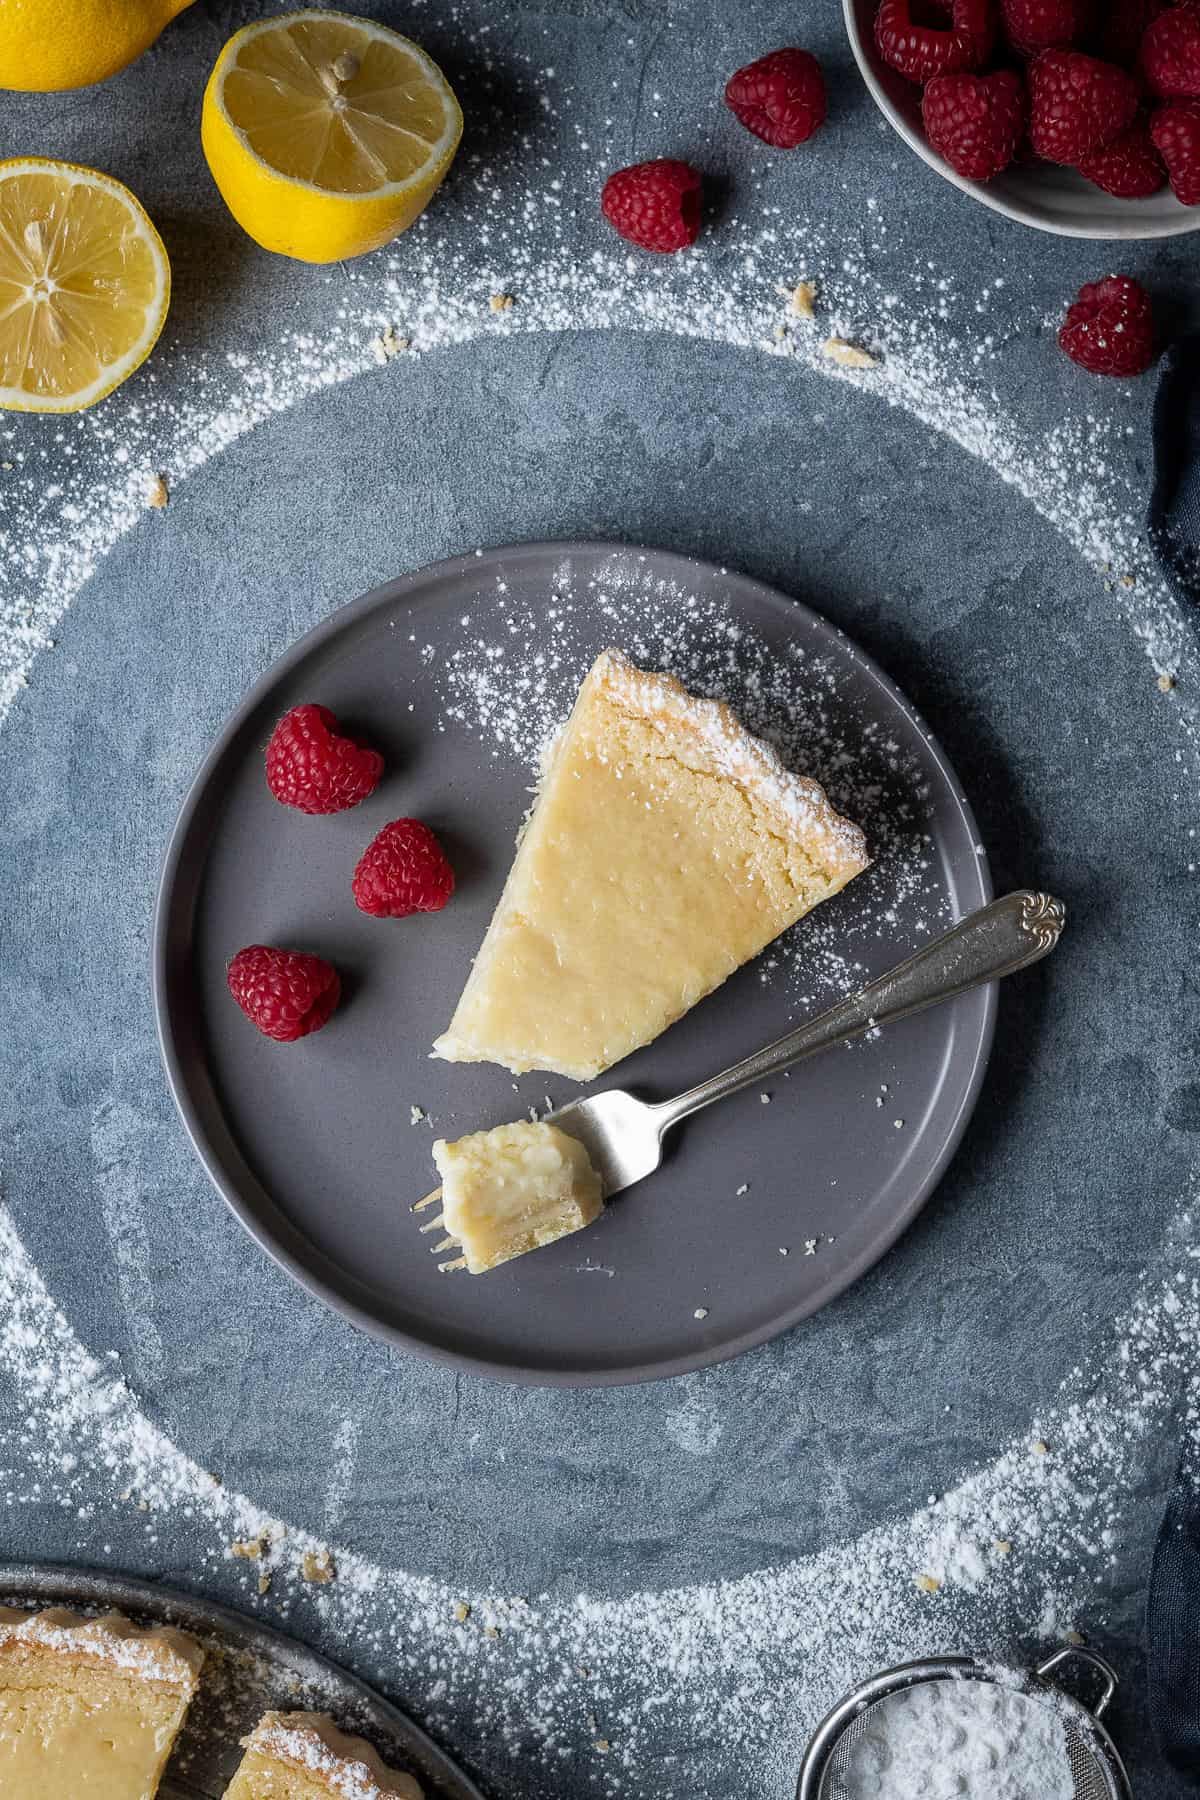 A slice of vegan lemon tart with raspberries and a fork on a grey plate